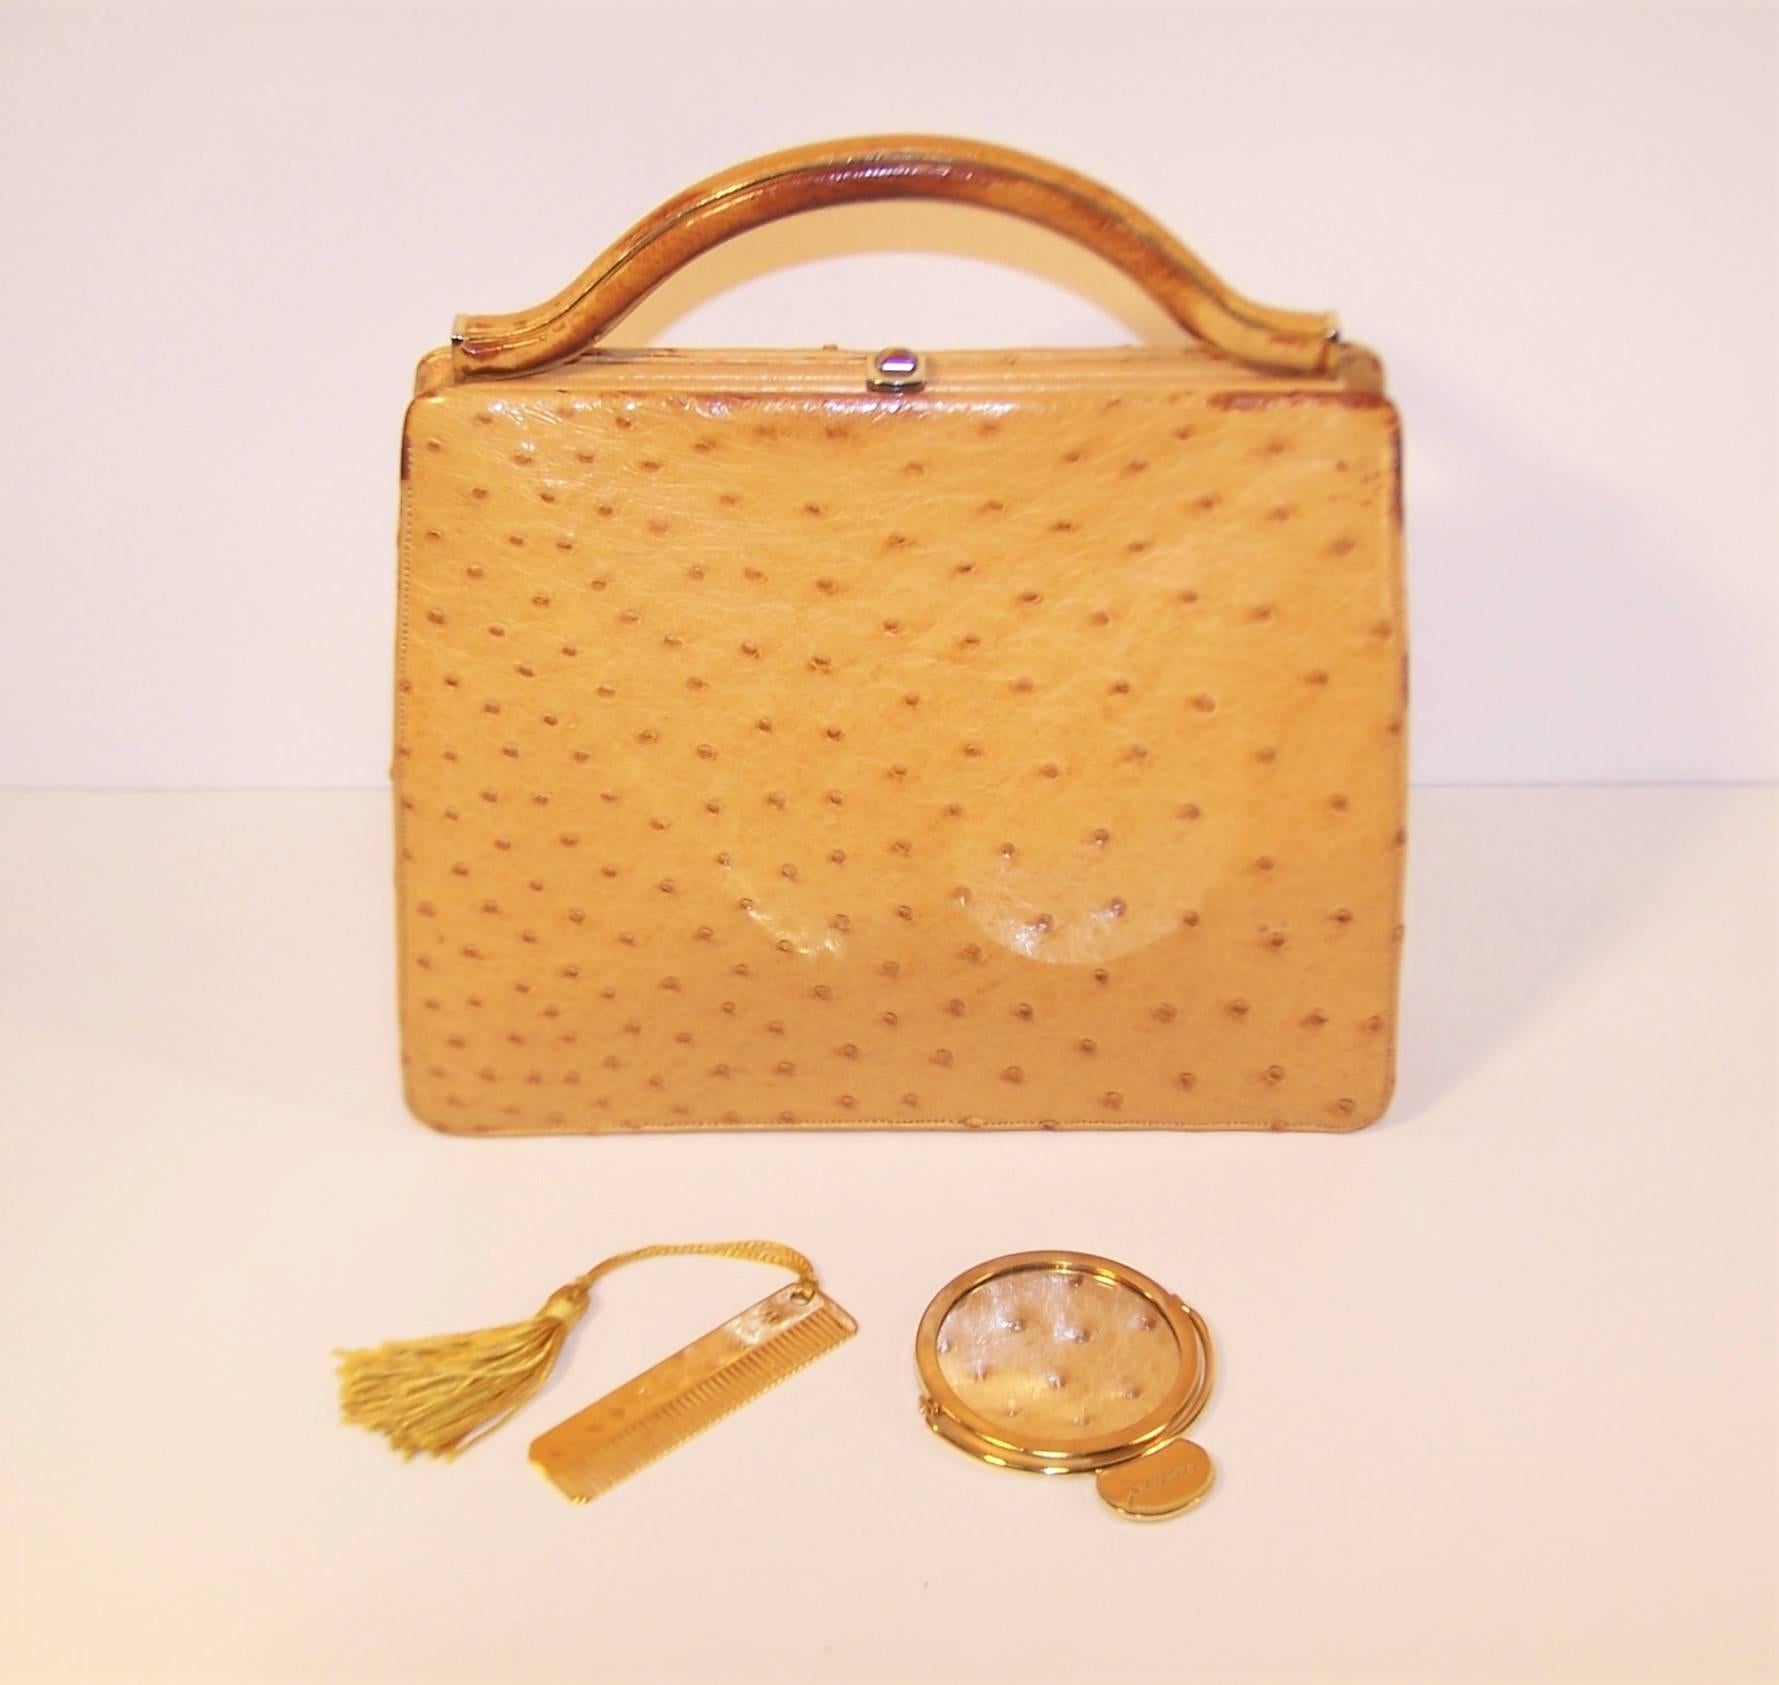 Lovely and ladylike!  This Judith Leiber ostrich skin handbag is a neutral light camel shade that promises to go with everything.  The structured top handle yields to a drop in shoulder strap with one click of the tiger's eye embellished snap